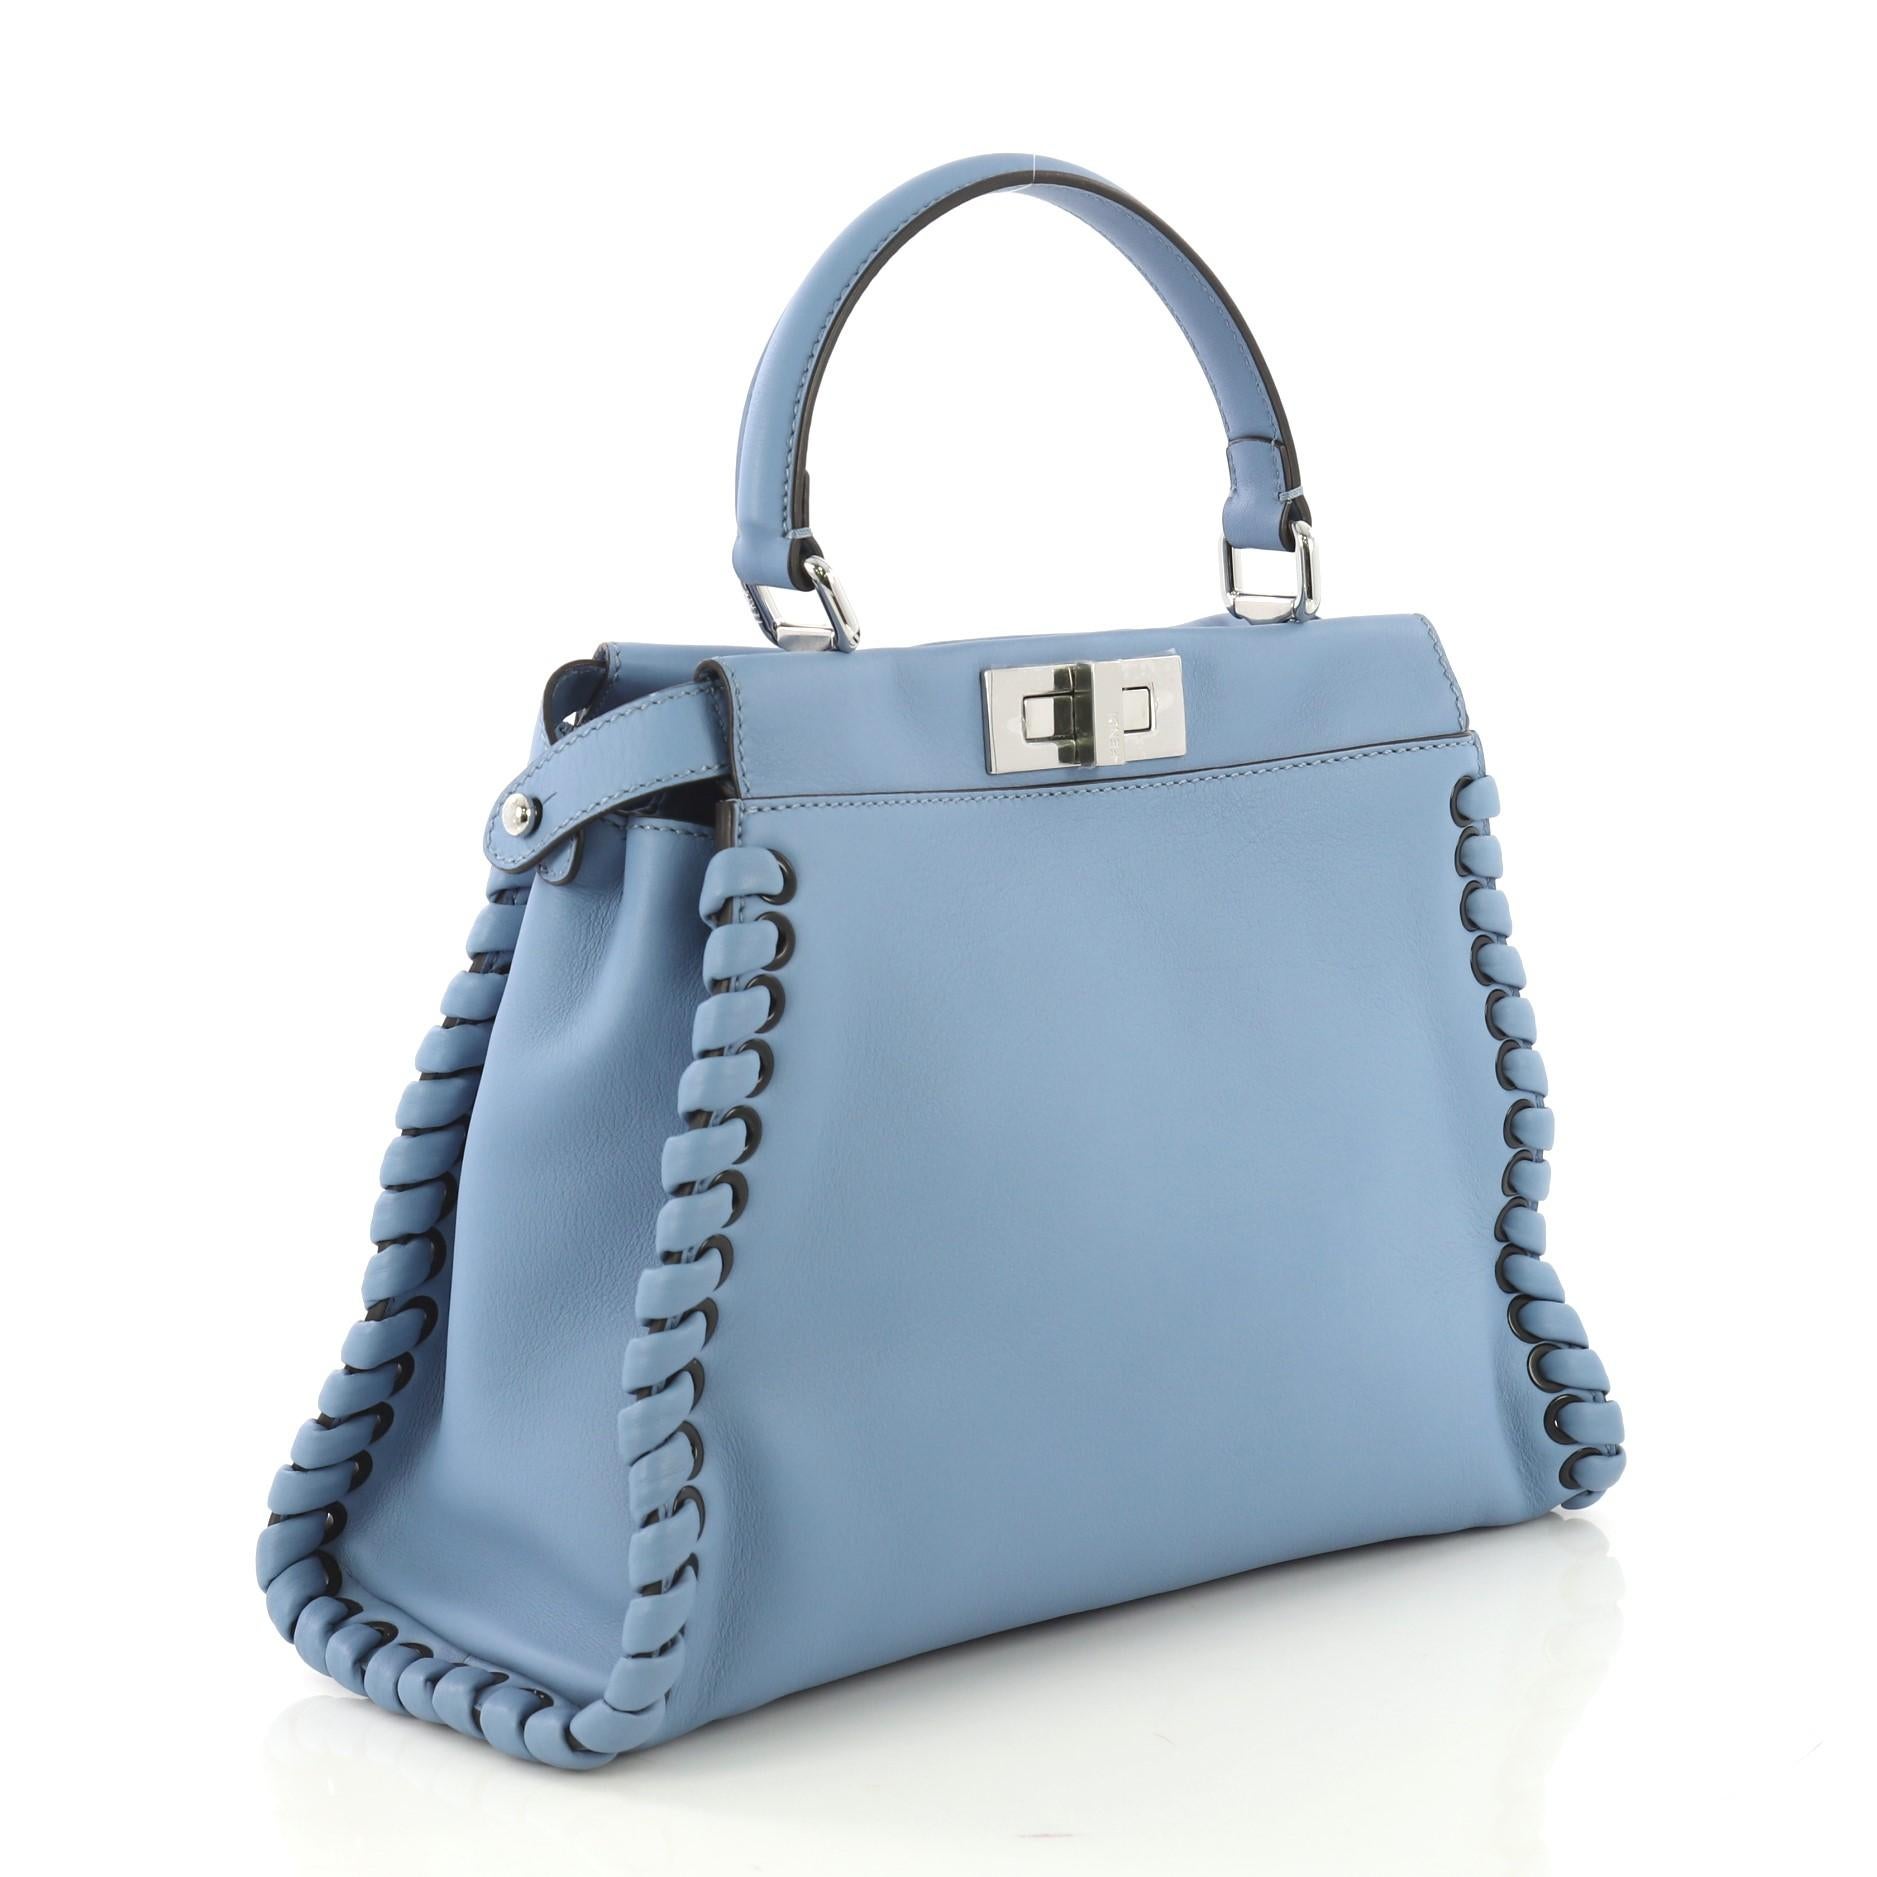 This Fendi Peekaboo Bag Whipstitch Leather Regular, crafted from blue leather, features a top frame silhouette, flat leather handle, whipstitch detailing, and silver-tone hardware. Its turn-lock and snap closures open to a black suede and blue